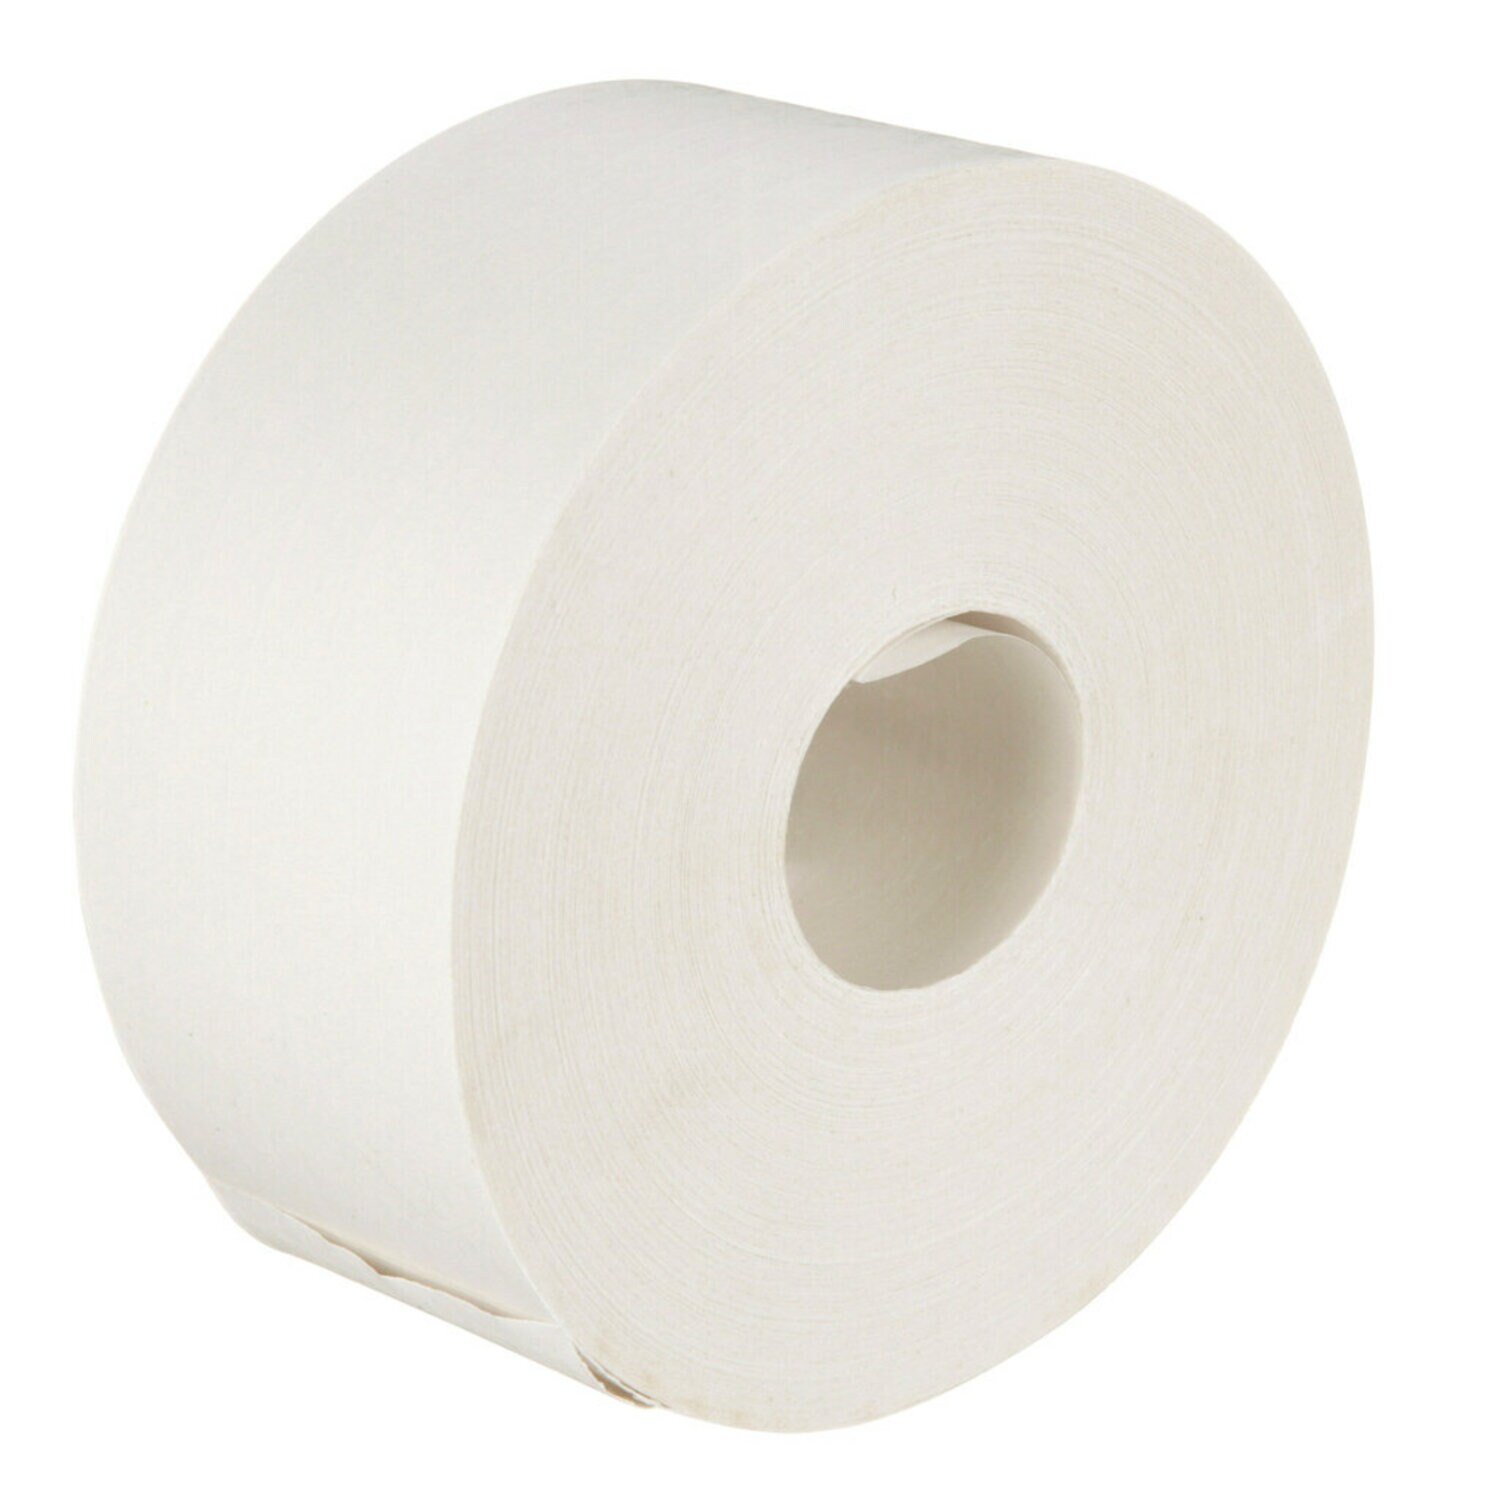 7000124807 - 3M Water Activated Paper Tape 6145, White, Light Duty Reinforced, 72 mm
x 450 ft, 10/Case